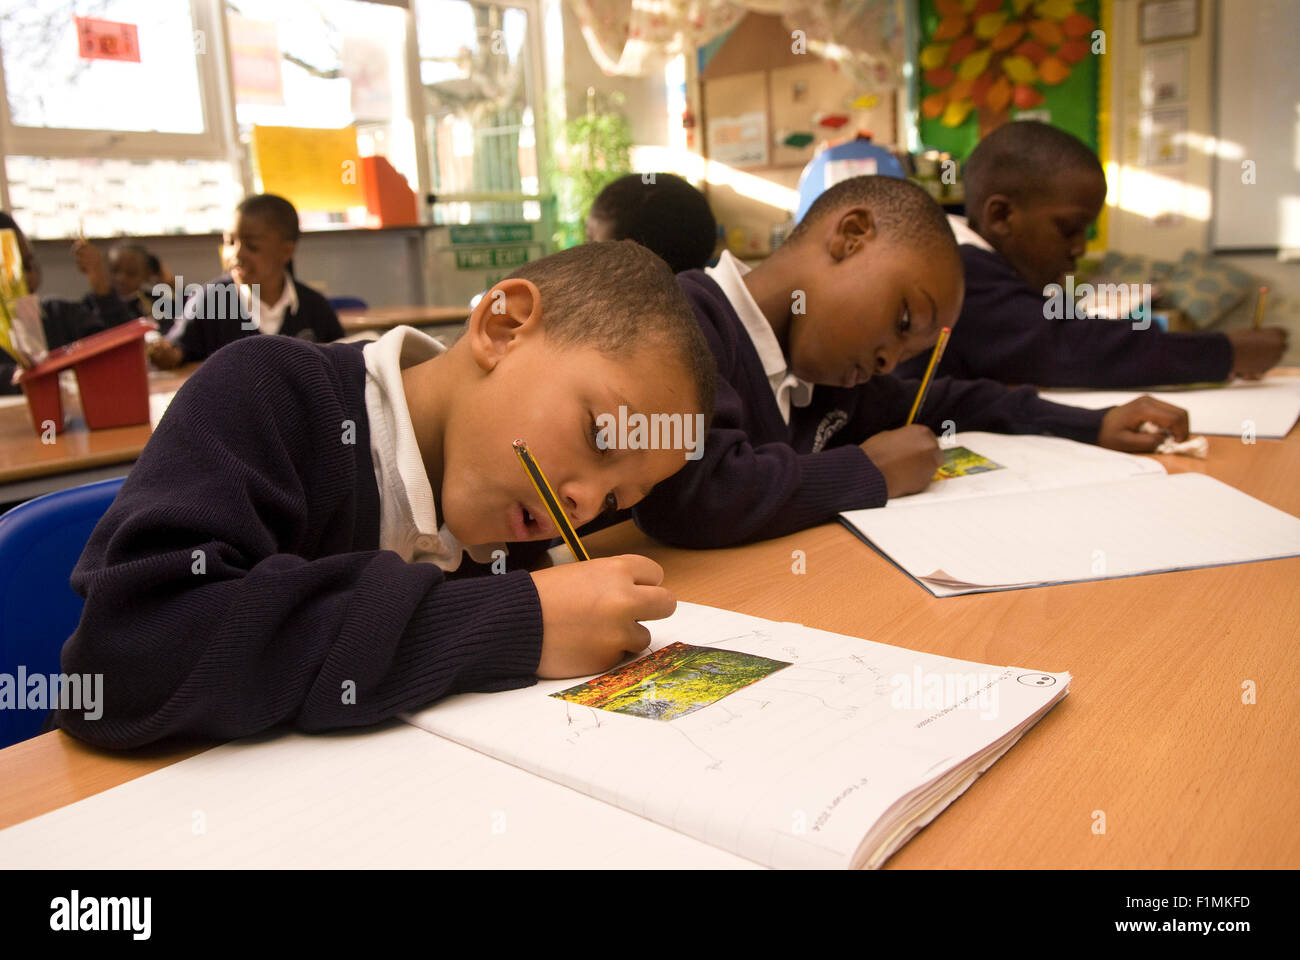 Primary school pupil's at work in classroom, London, UK. Stock Photo